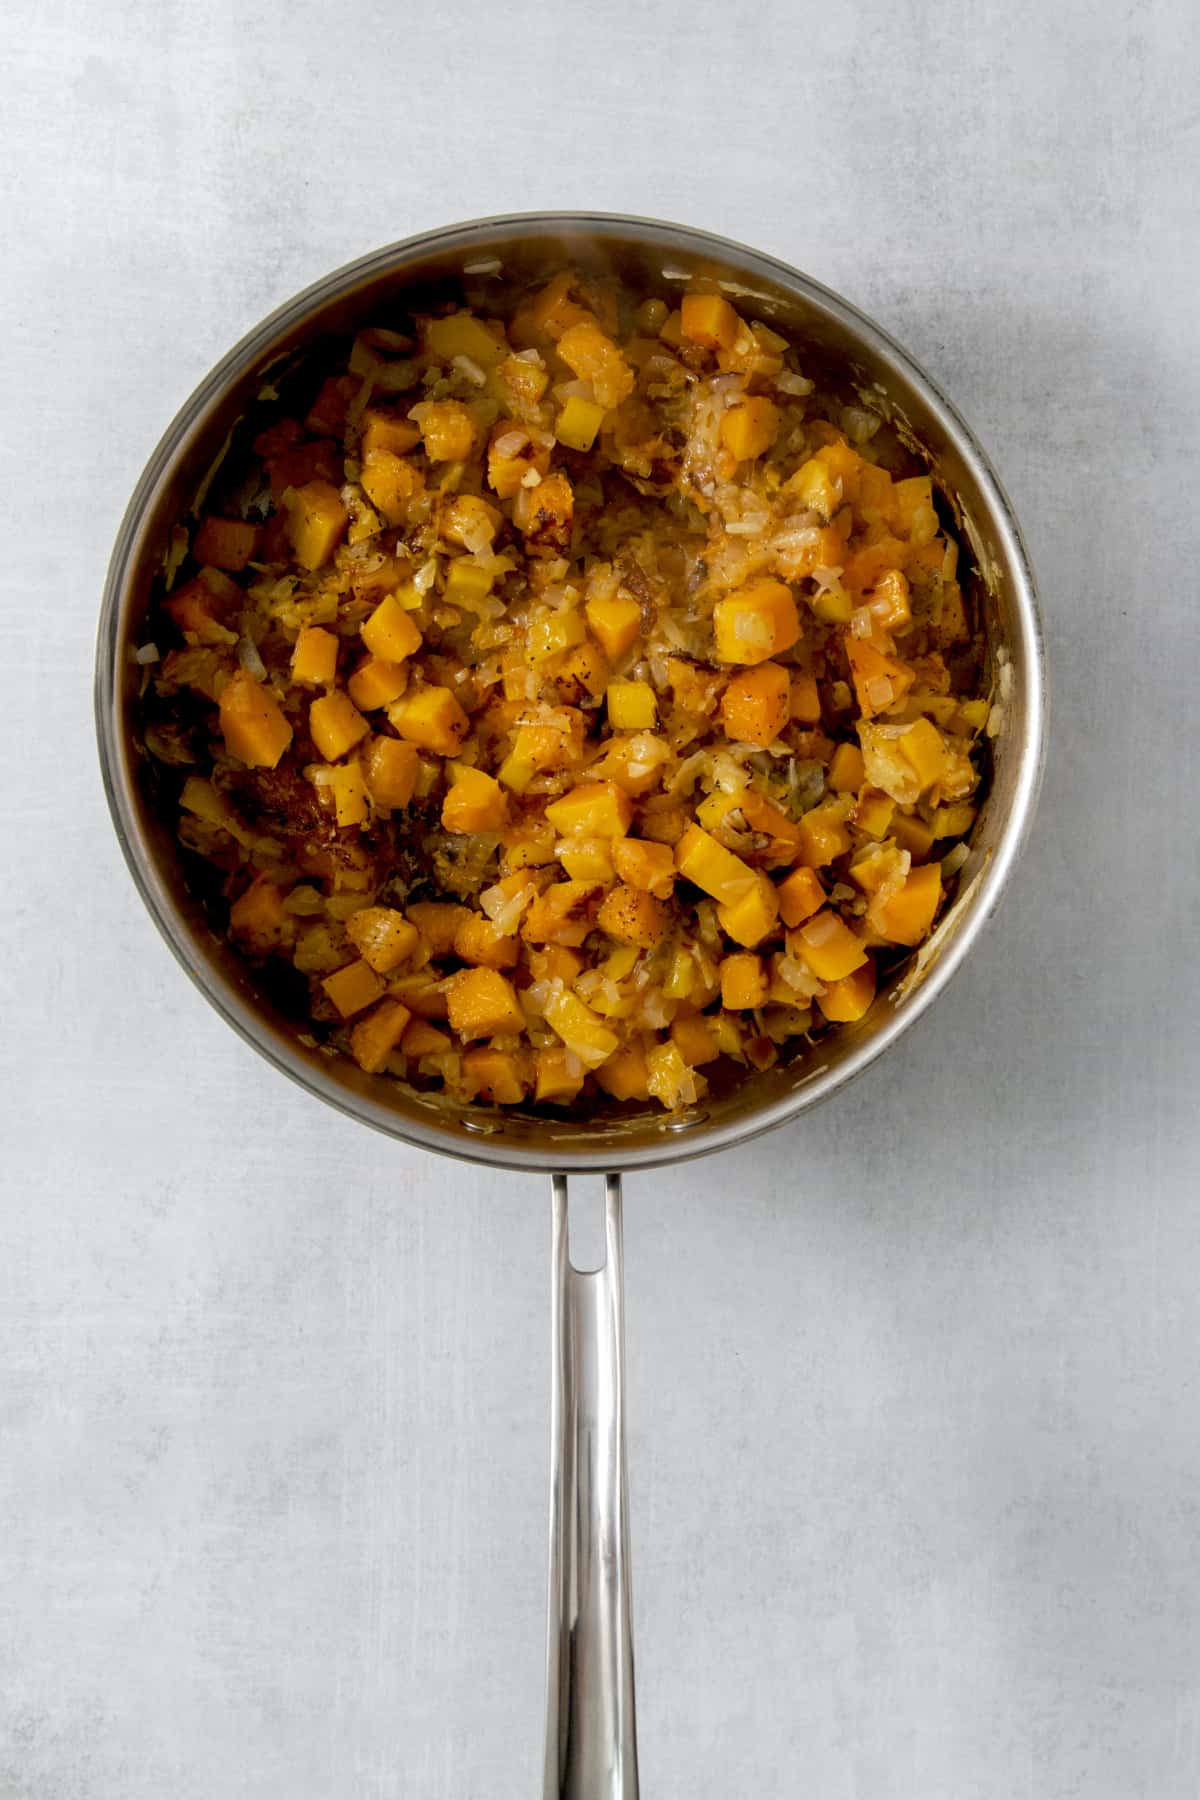 cooked potatoes, squash, onion, and pepper in a pan.